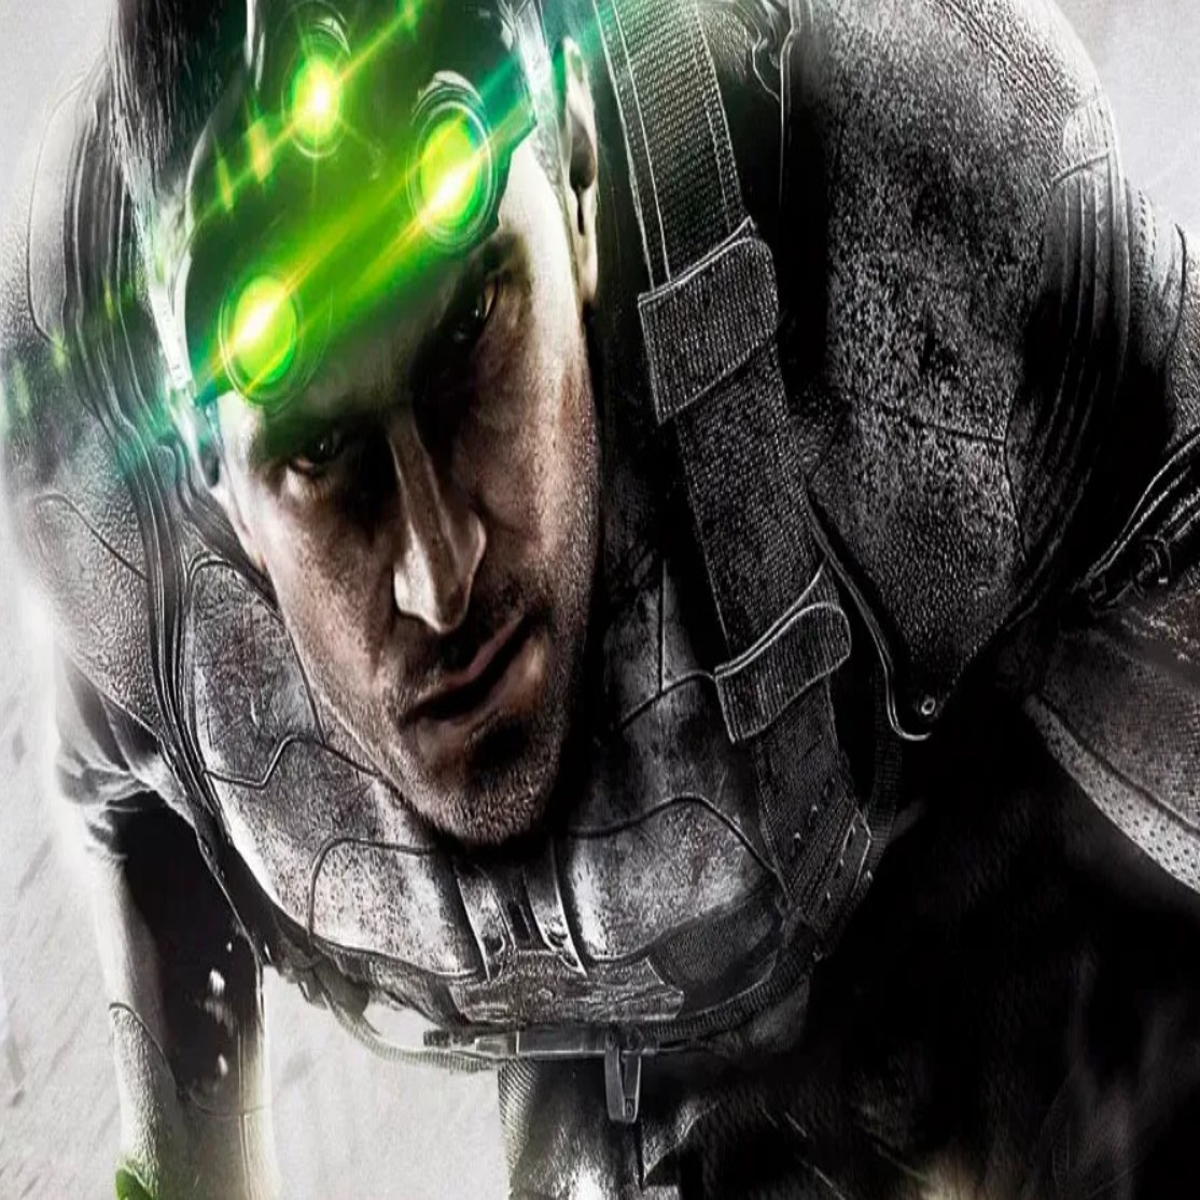 What we know about the Splinter Cell remake from Ubisoft